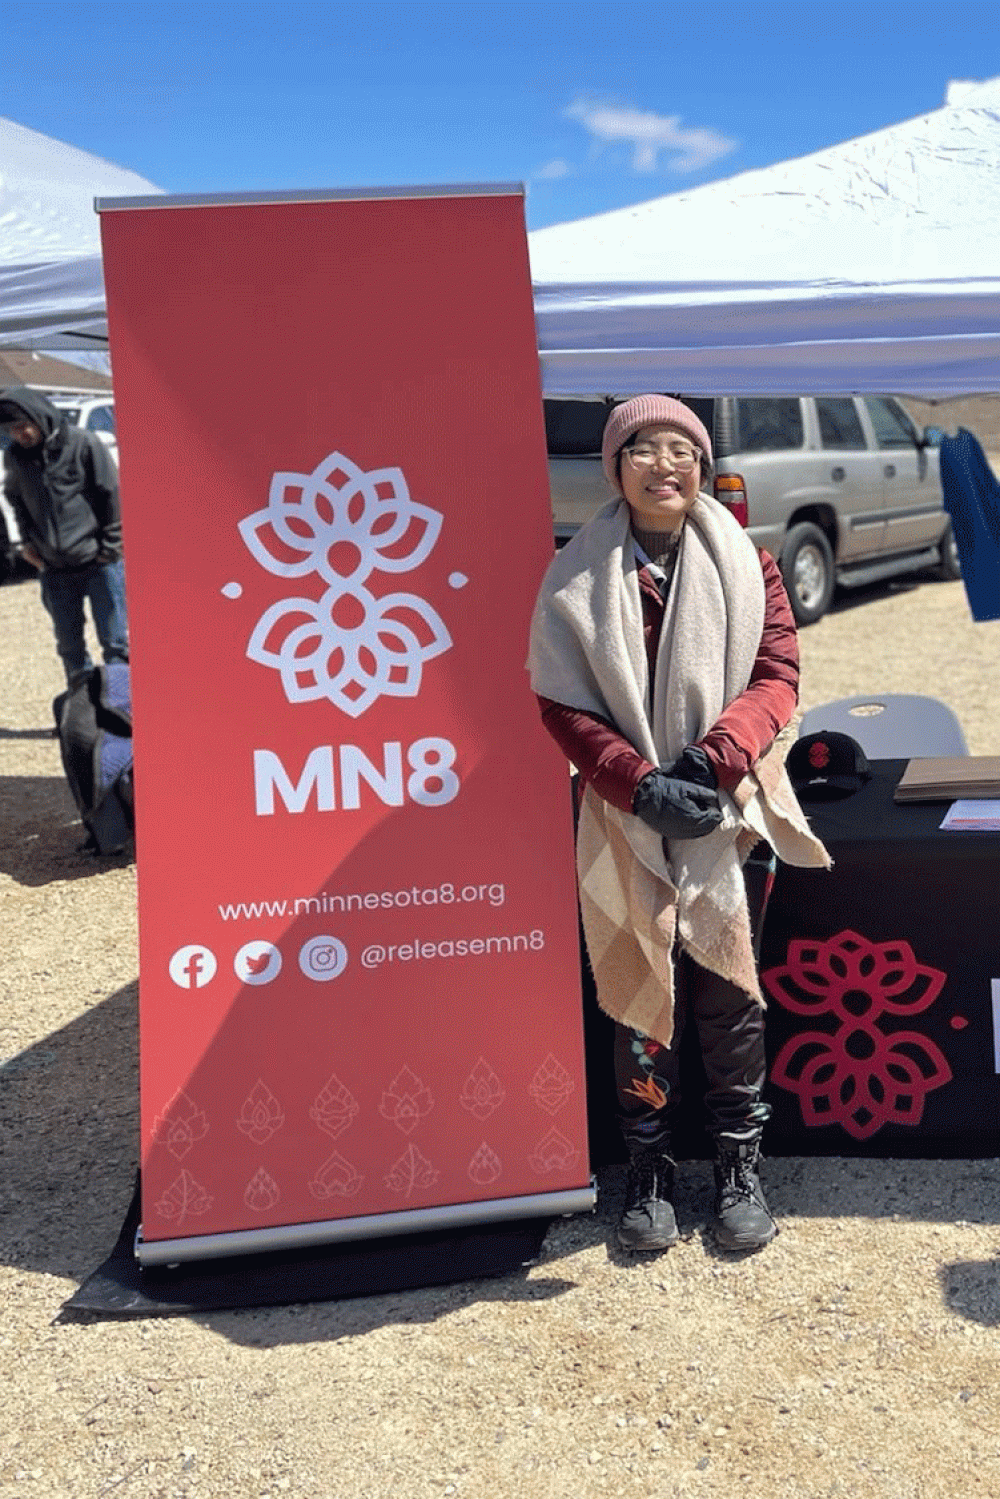 A person stands next to a red MN8 banner at an outdoor celebration.